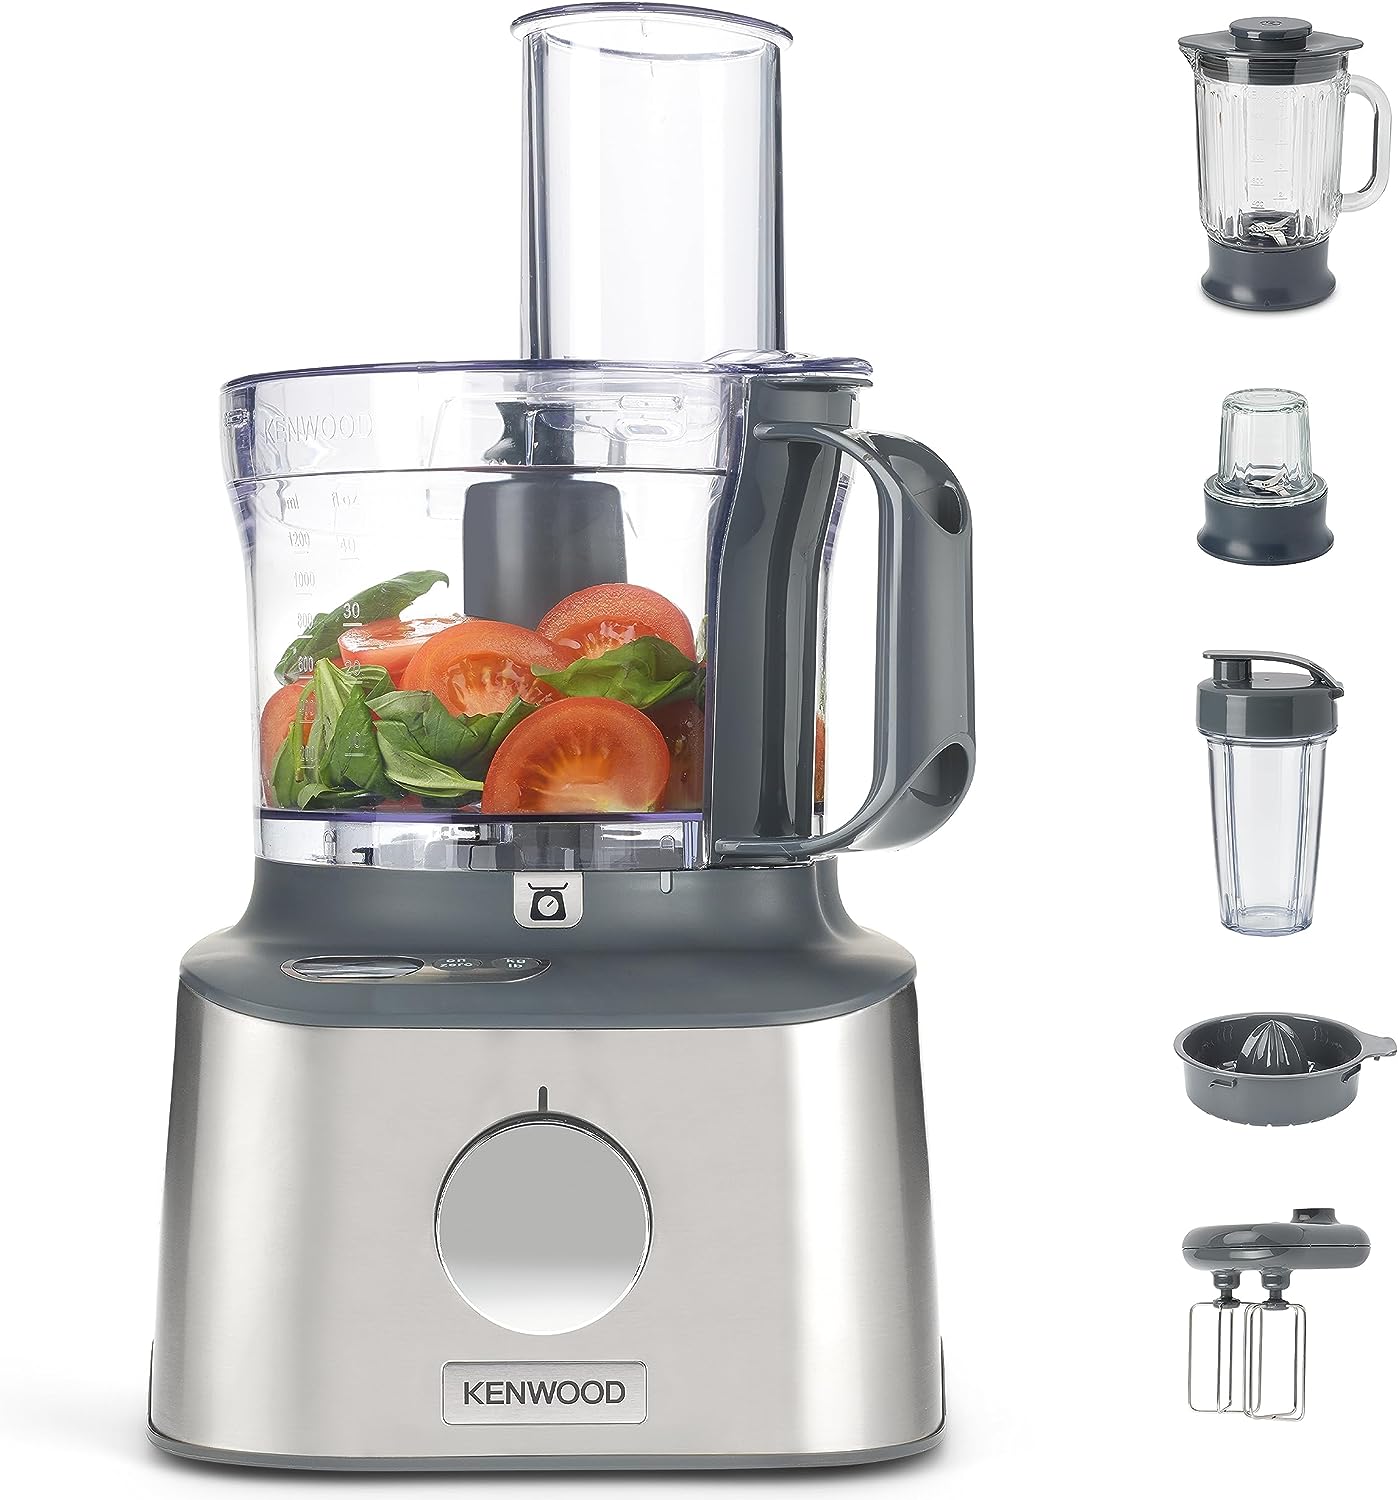 Kenwood Multipro Compact+ FDM316SS Compact Food Processor, 2.1 Litres, Includes Stainless Steel Knife, 3 Working Discs and 8 Other Accessories, Metal Housing, 800 Watt, Silver